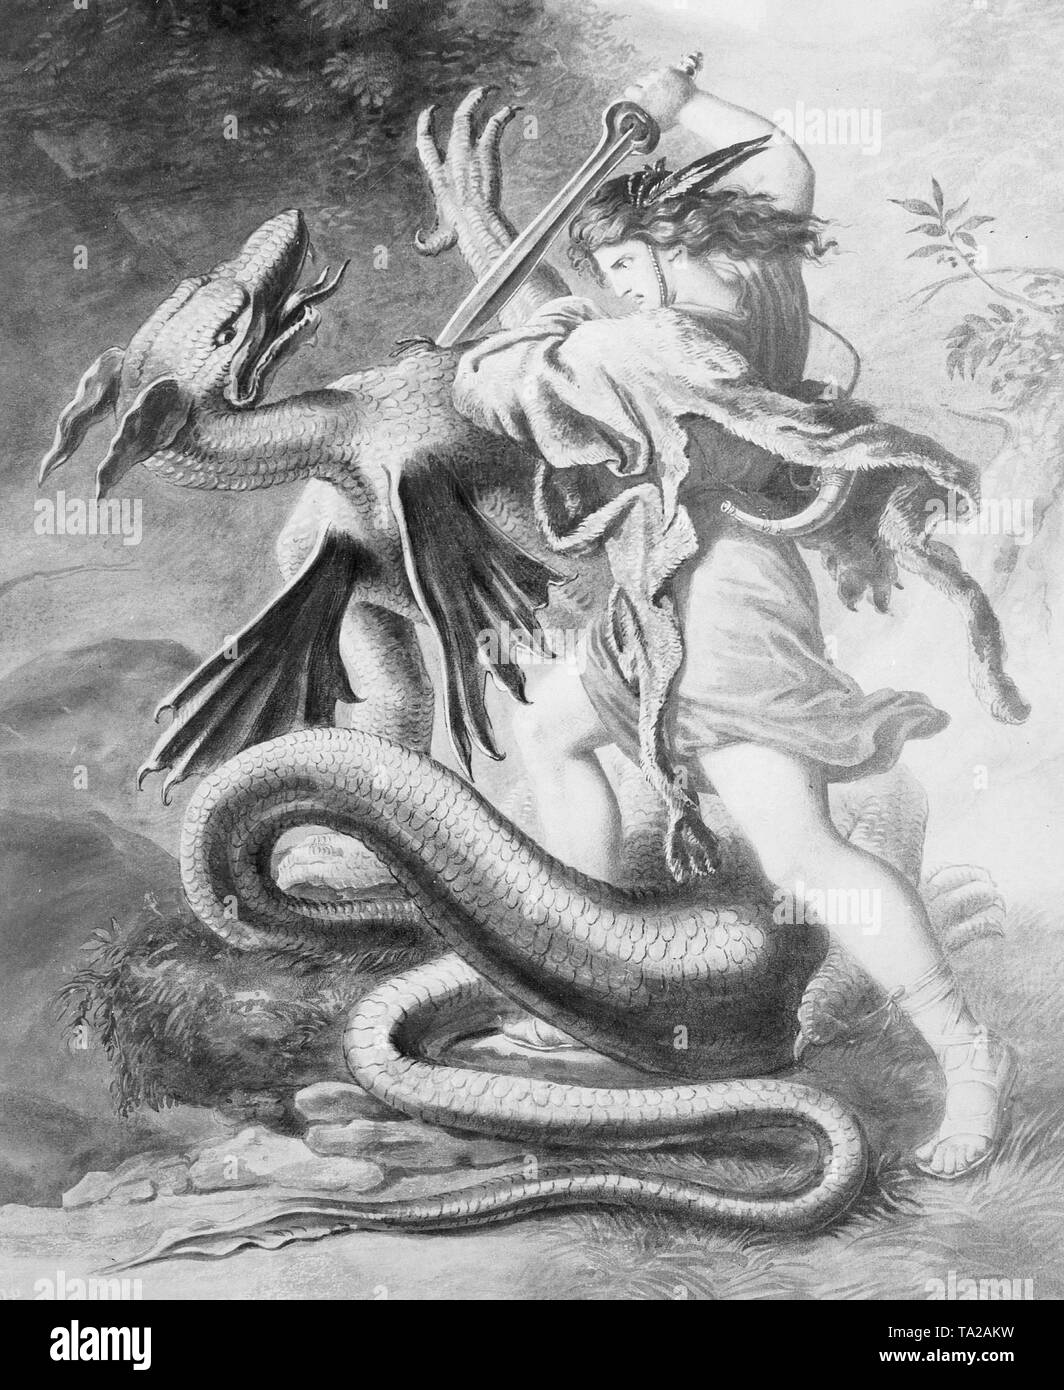 The Germanic mythical figure Siegfried slaying the dragon. Stock Photo